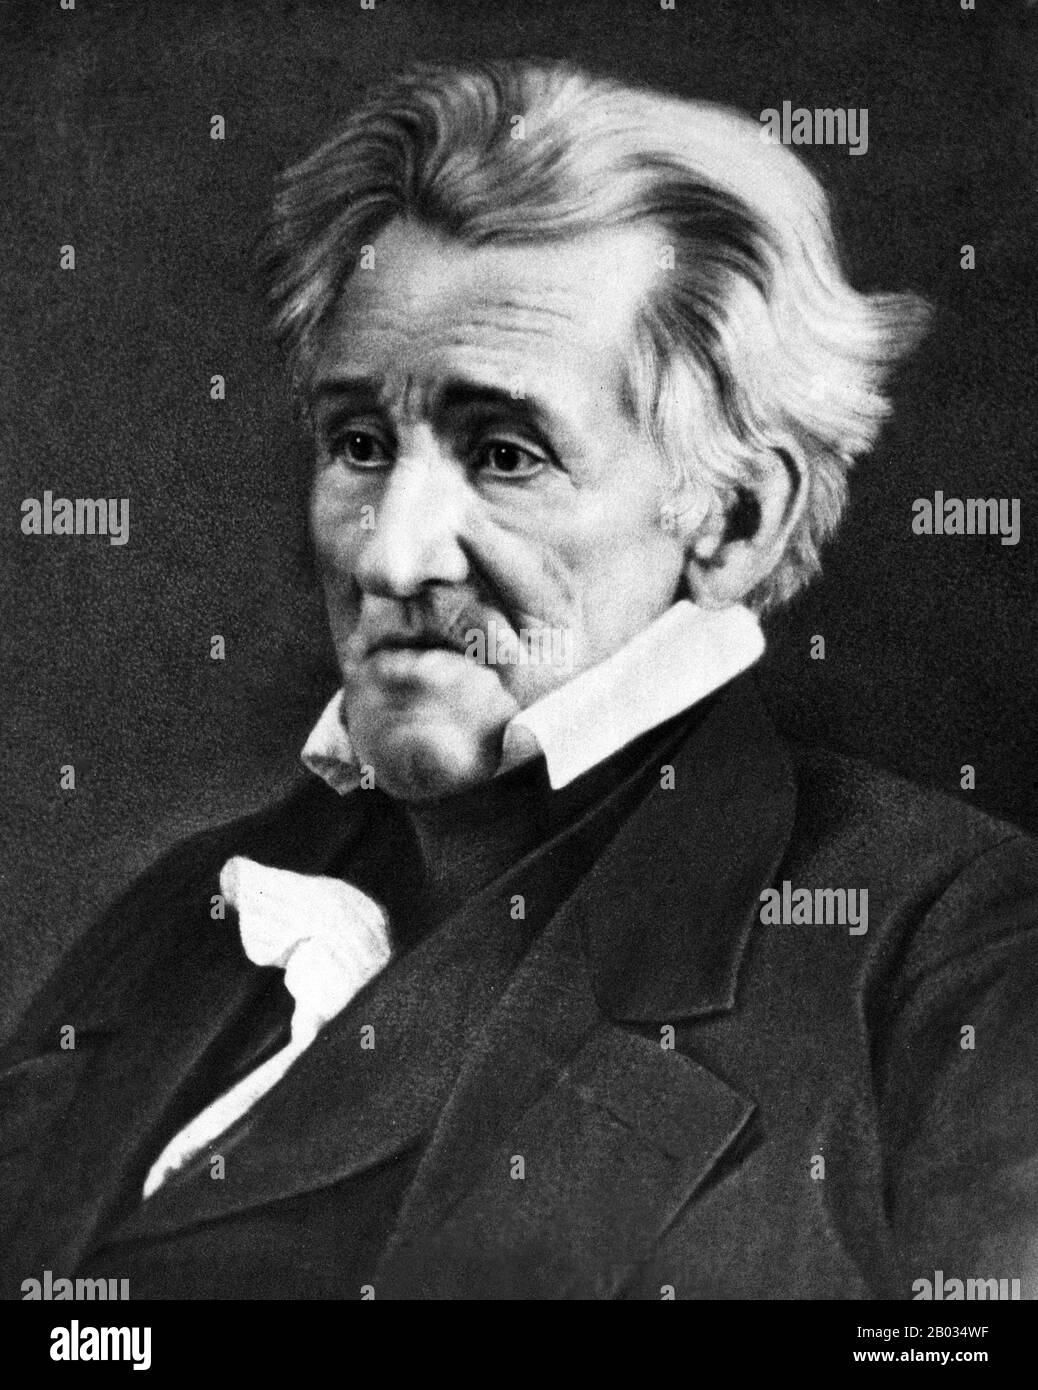 Andrew Jackson (March 15, 1767 – June 8, 1845) was an American statesman who served as the seventh President of the United States from 1829 to 1837. Stock Photo